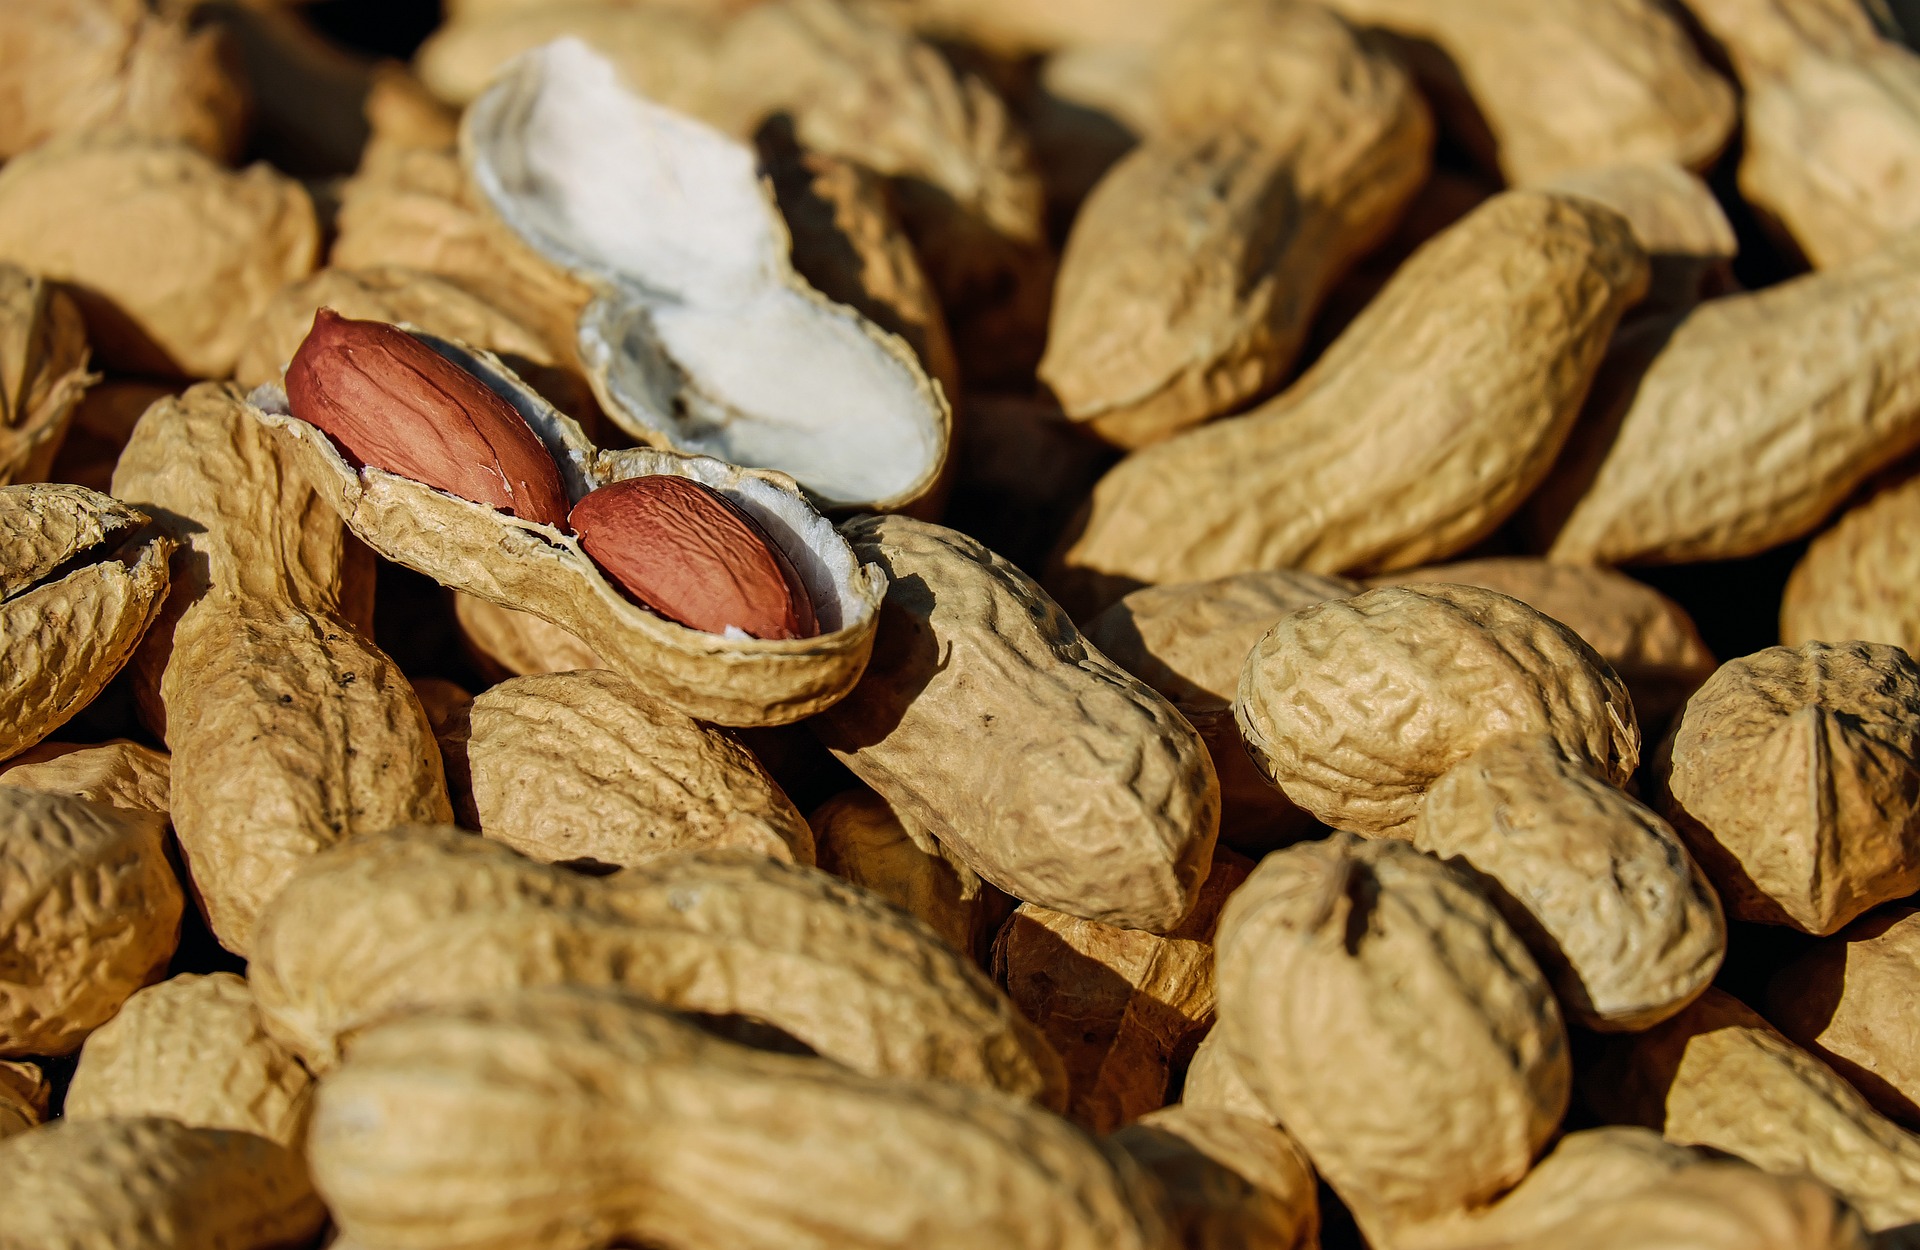 A handful of peanuts, unshelled, with some in shells; our No Win No Fee Solicitors discuss peanut allergies in the workplace.